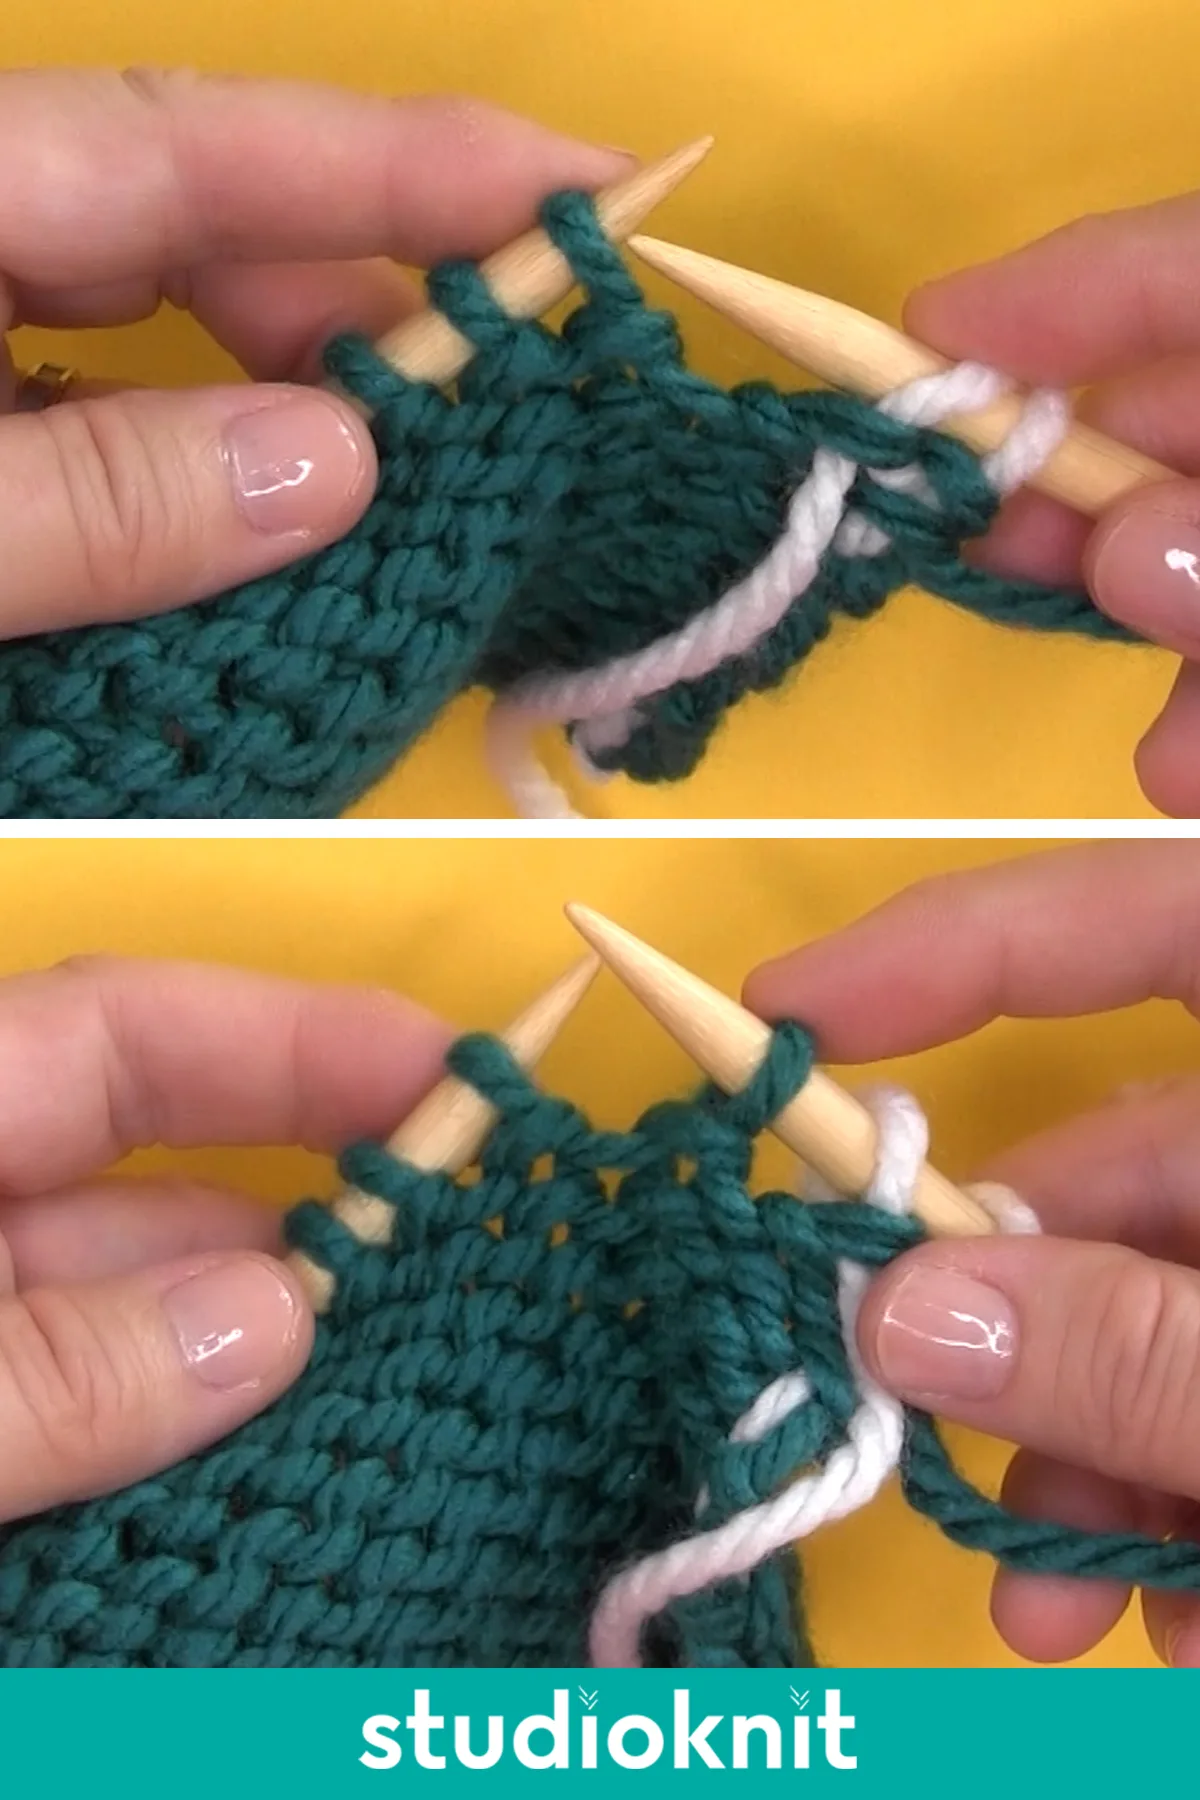 Demonstration of a Slip Stitch Purlwise on a Purl Row with Yarn in Front.